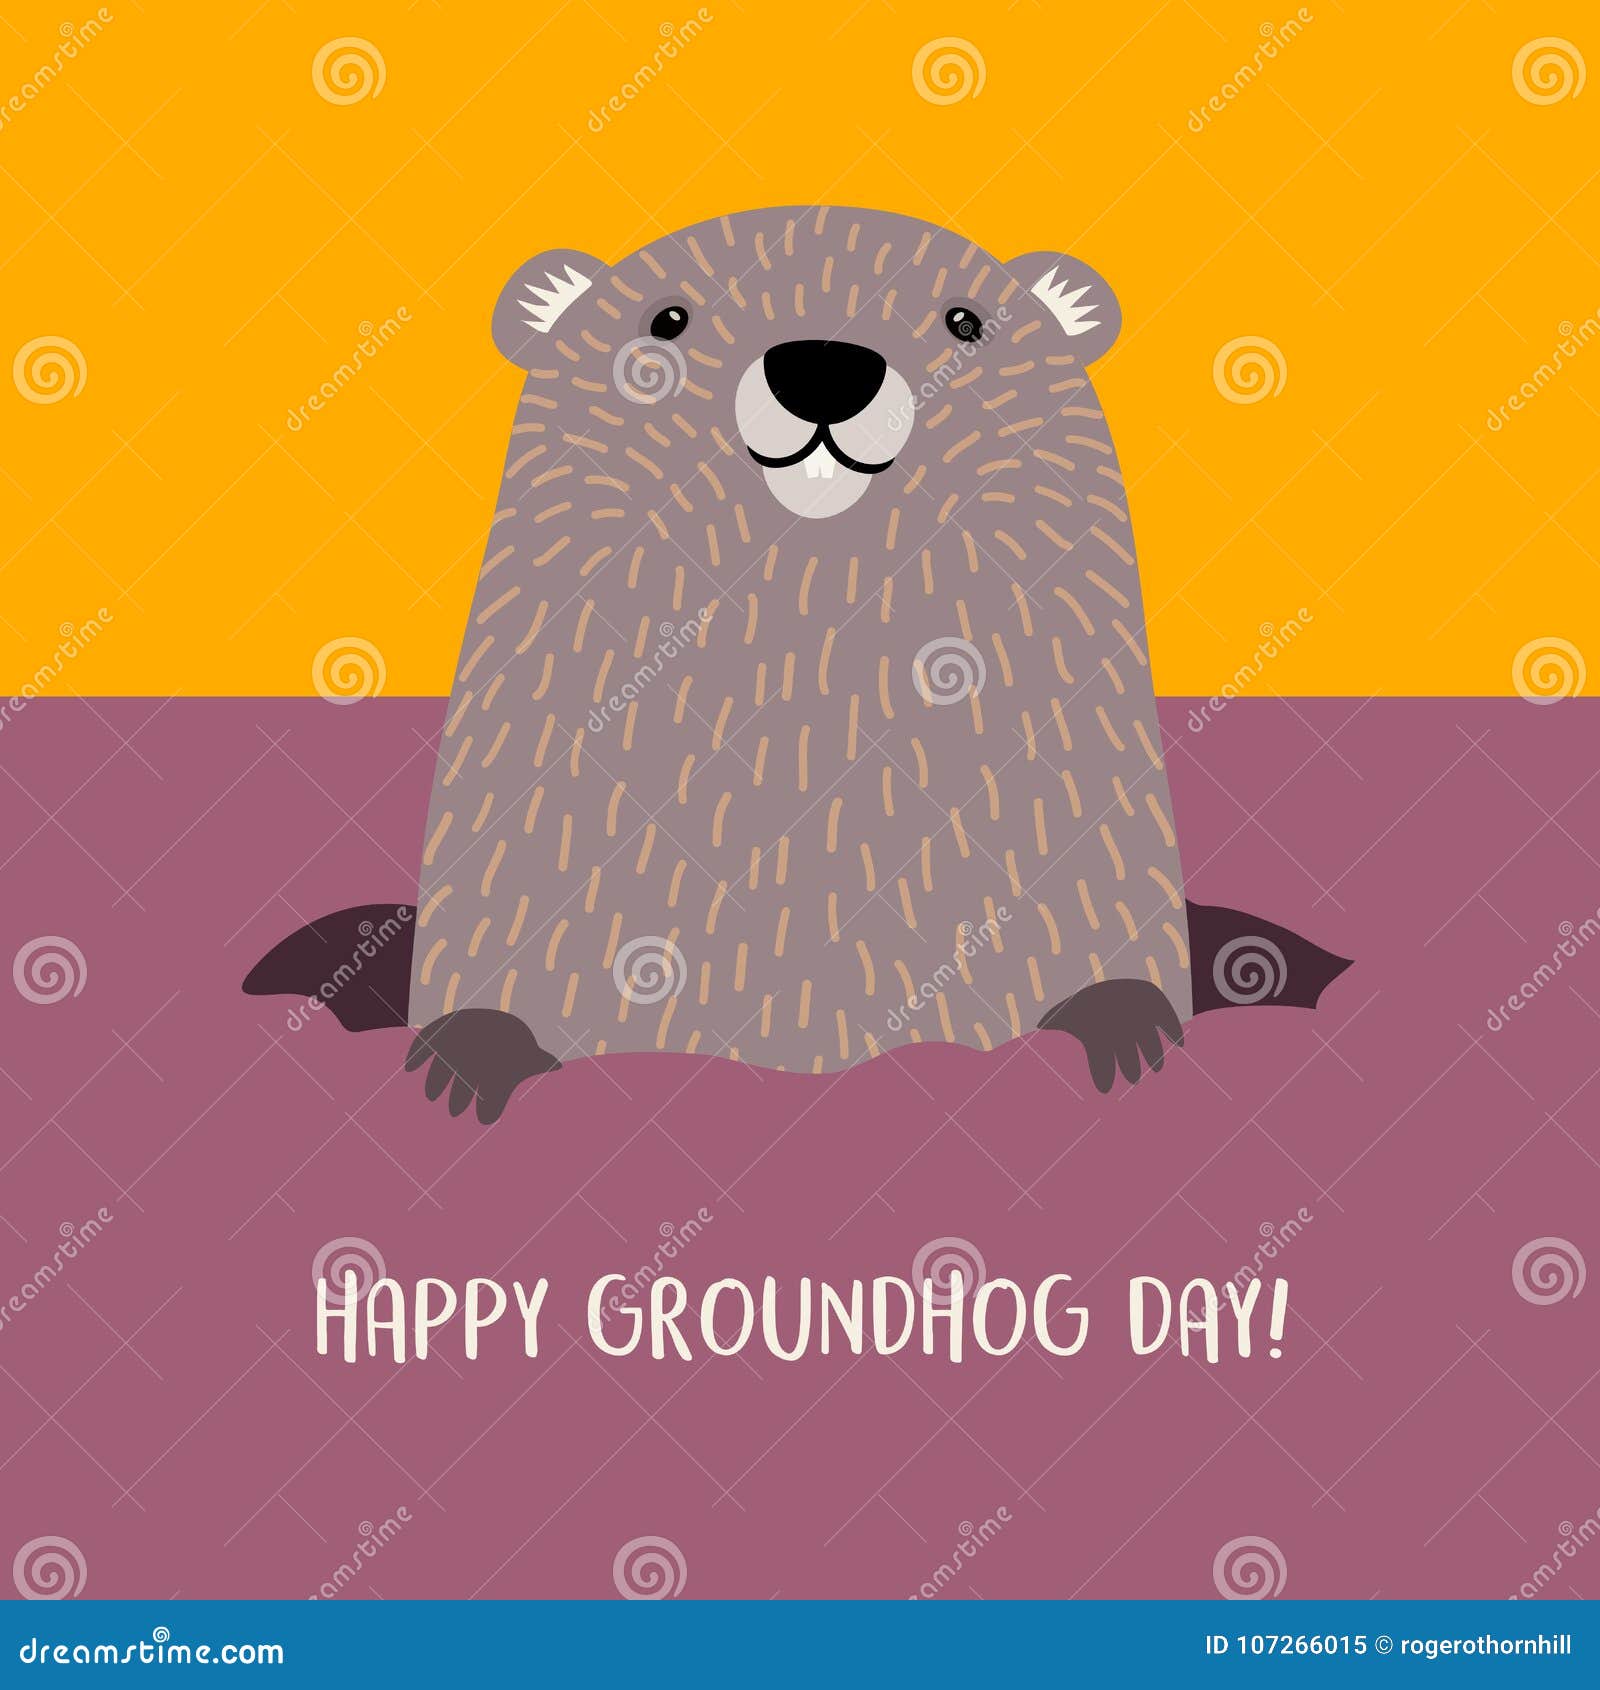 happy groundhog day groundhog emerging from his burrow.